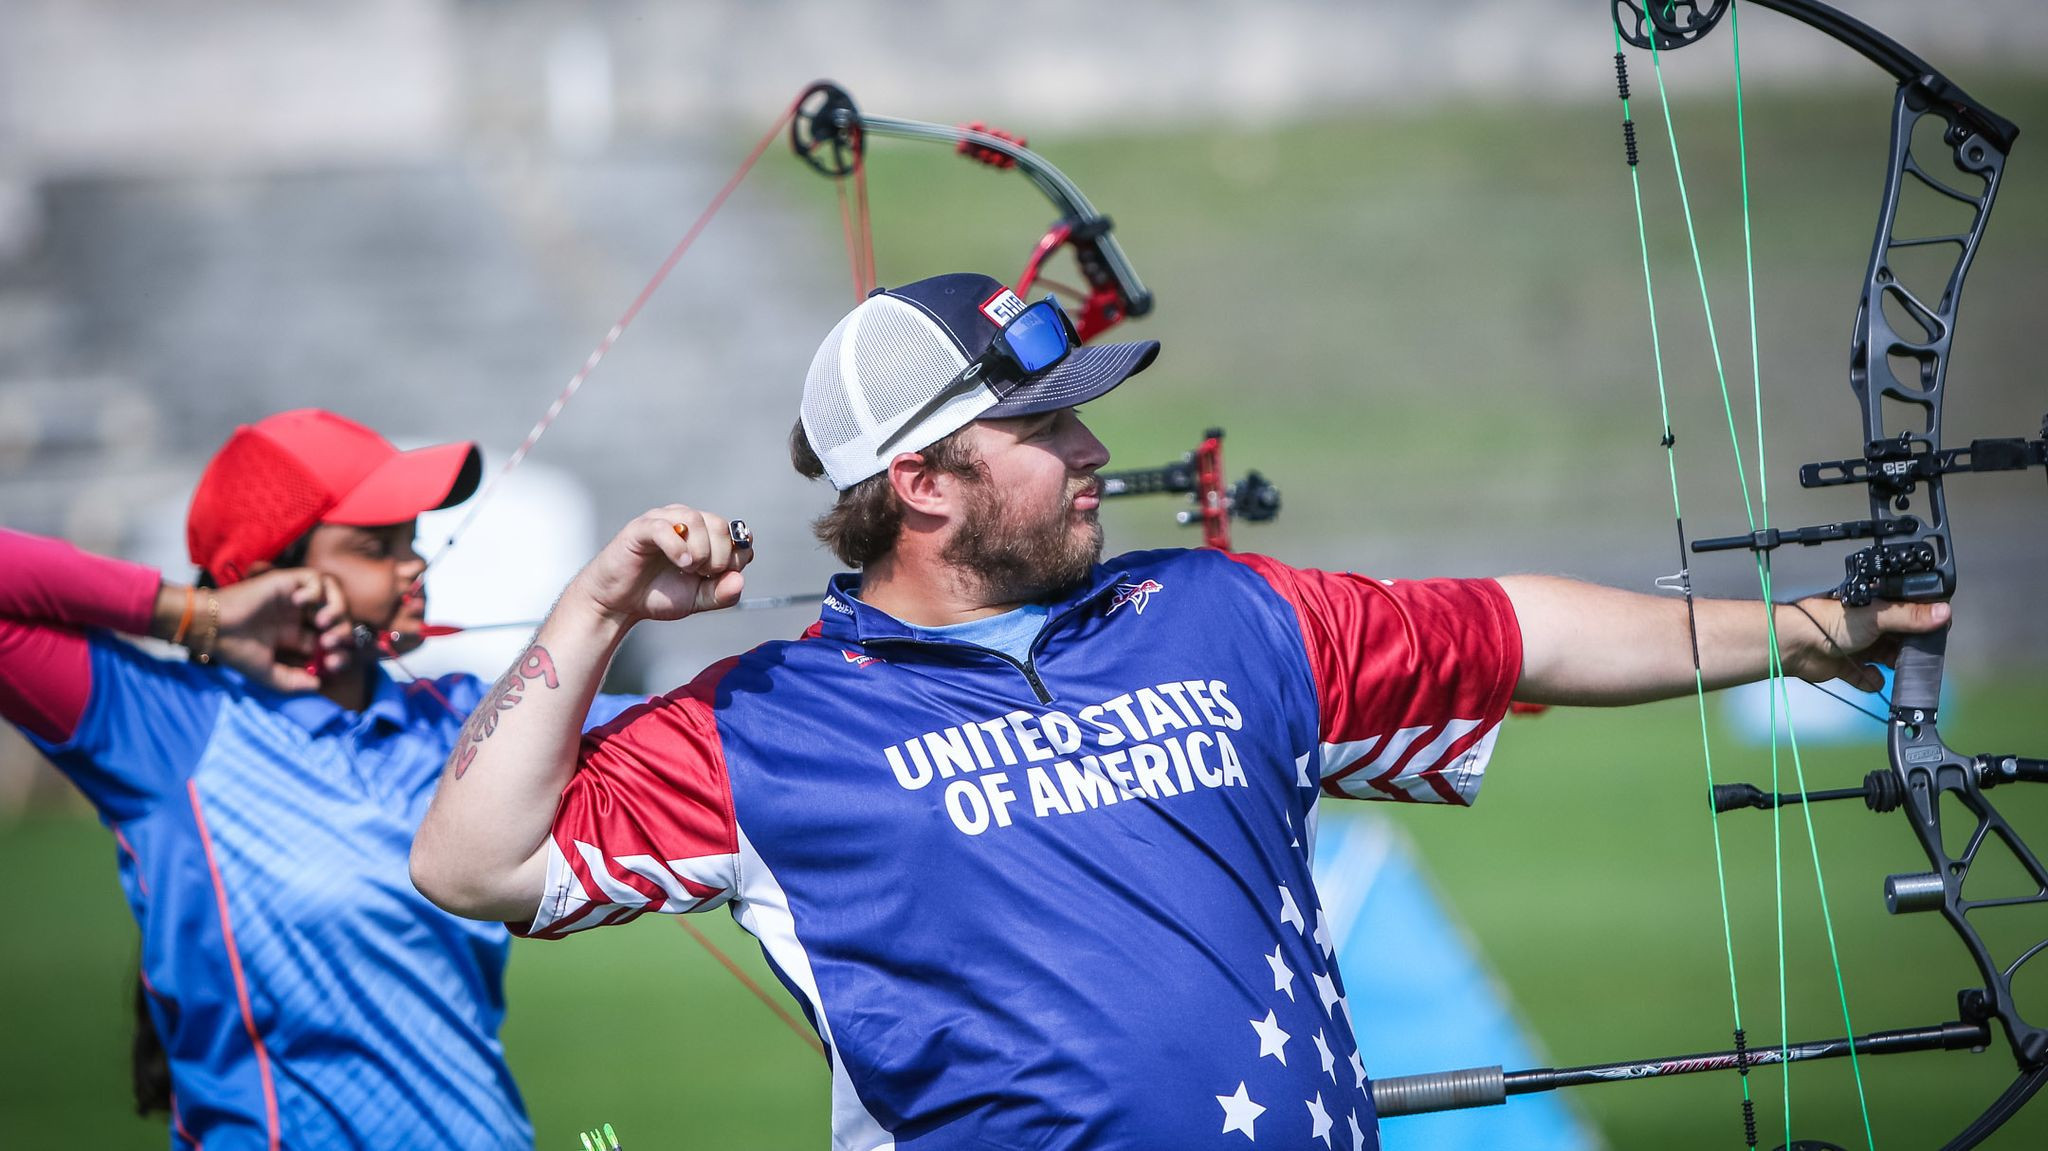 The United States reached the final of the mixed team compound competition at the Archery World Cup in Berlin ©World Archery